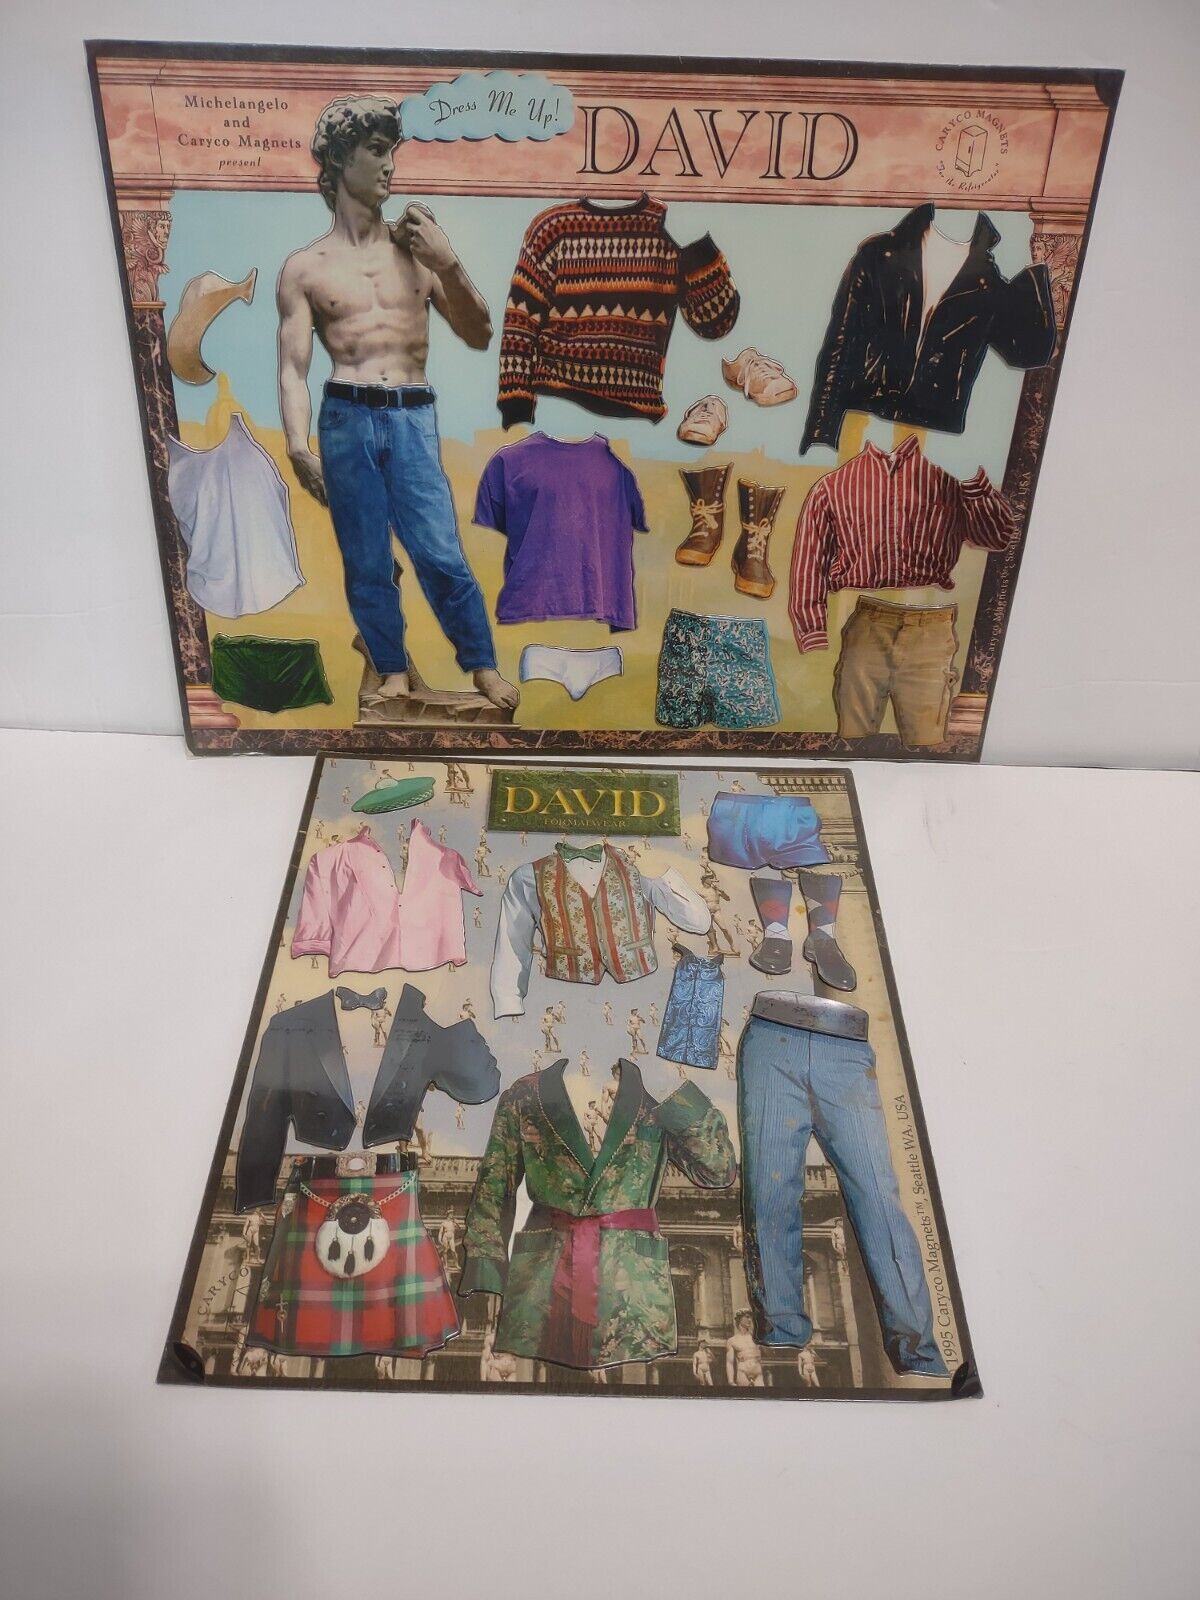 Vtg 1995 David Classic Michelangelo Caryco Dress Up Formalware Magnets Gay Int.